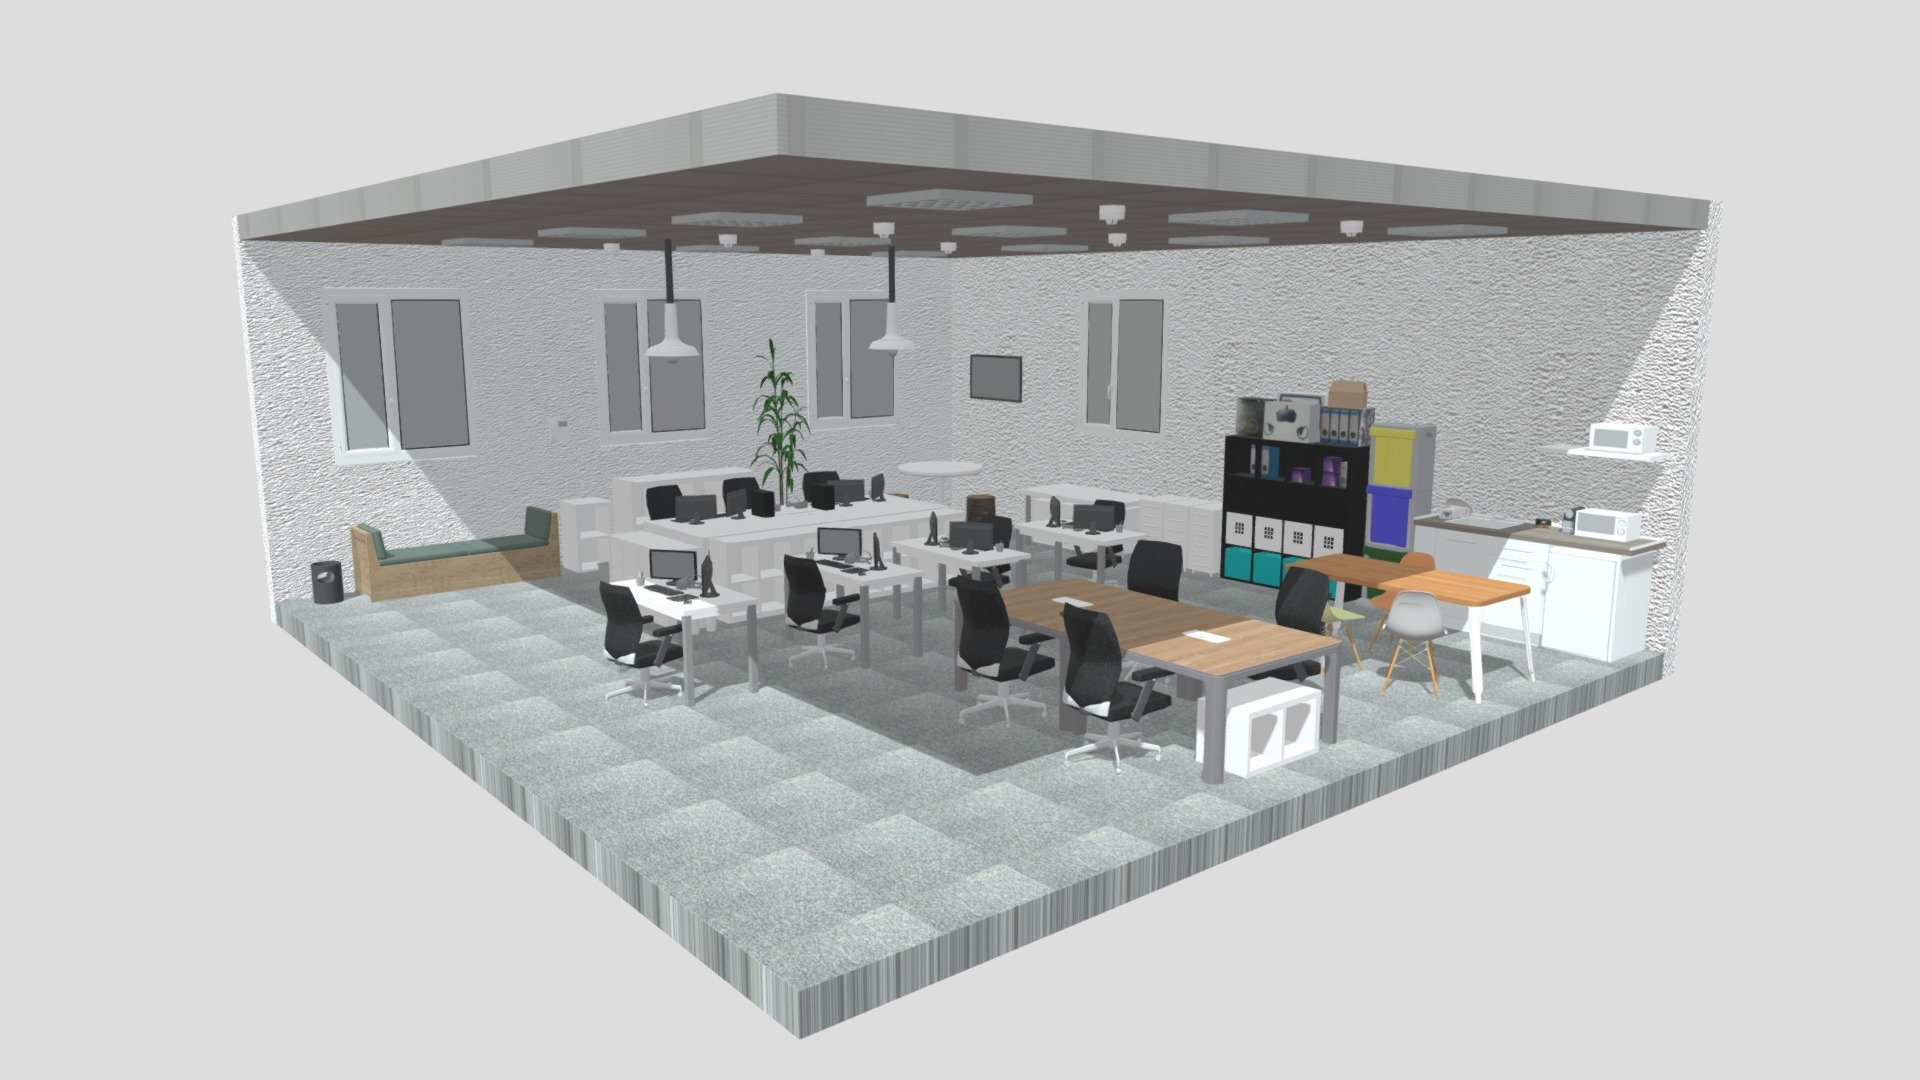 This model contains a great complete office based on real differents furnitures from a real office which i modeled in Maya 2018. This model is perfect to create a new great scene from a house or an office or whatever you think is great. You can use any of the different furnitures in the room as you want with every separated texture.

The model is separated in every different type of furniture which will be organized in the outliner, the one i will show you in some of the screens you can see above. Soon i will upload a new office scene, with the same furnitures but with a different office structure. If you are interested in getting it before contact me.

This model is one of a great collection of office furnitures which will be published separately and in 1 unique pack.

If you are interested in getting this model contact me.

If you experience any kind of difficulties, be sure to contact me and i will help you as soon as i read the message. Sincerely Yours, ViperJr3D - Office - Buy Royalty Free 3D model by ViperJr3D 3d model